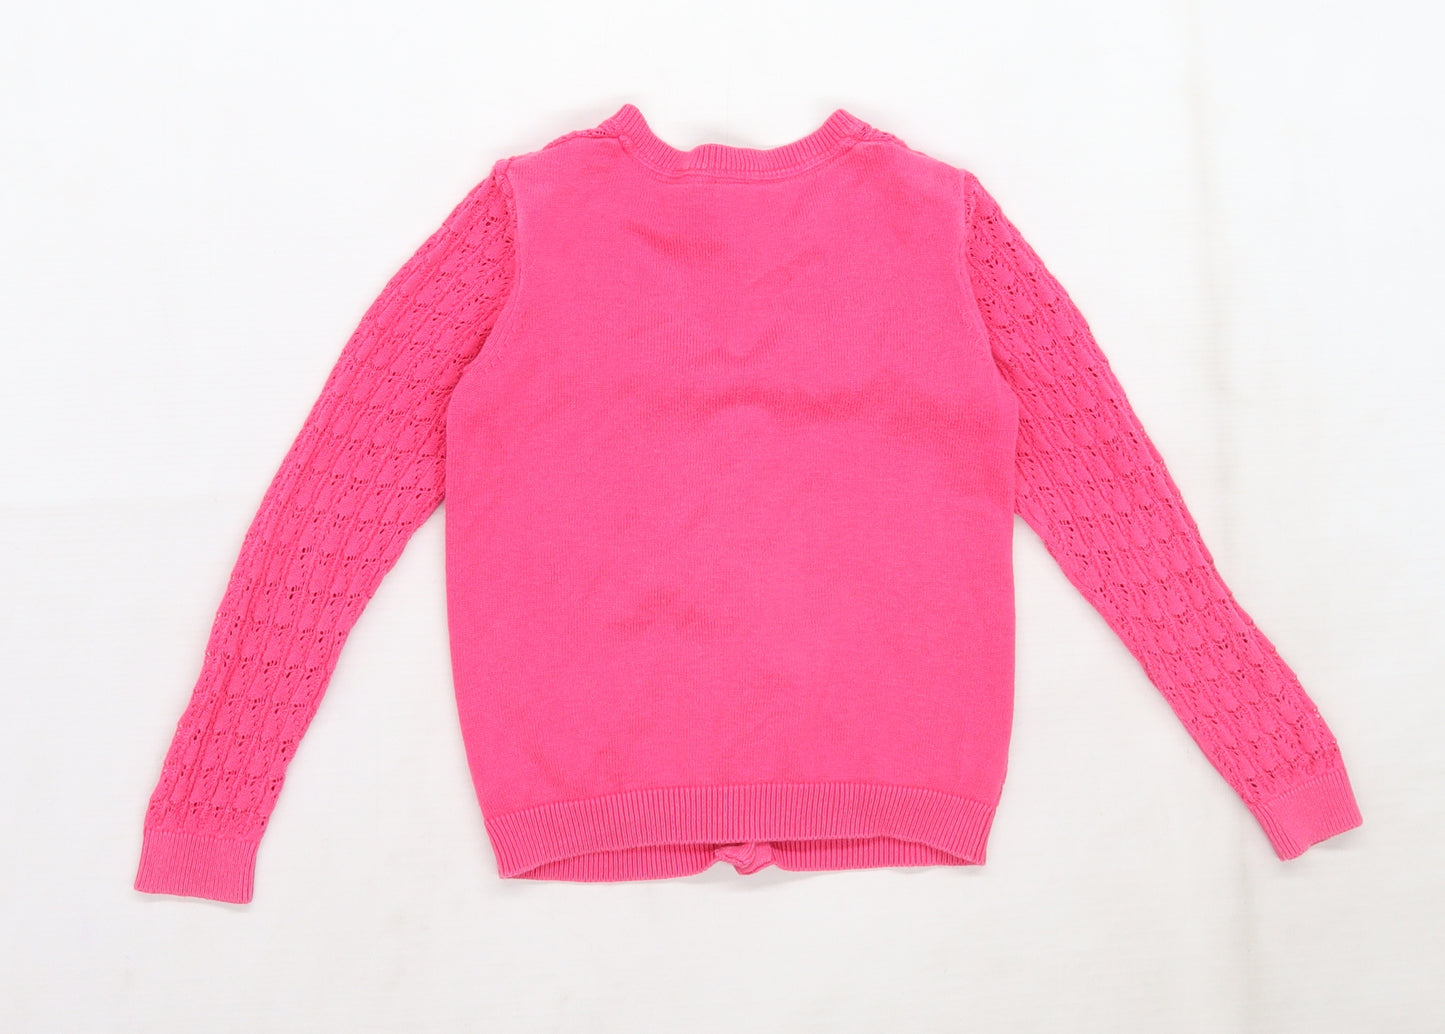 Mini Boden Girls Pink Floral Knit Cardigan Jumper Size 4-5 Years